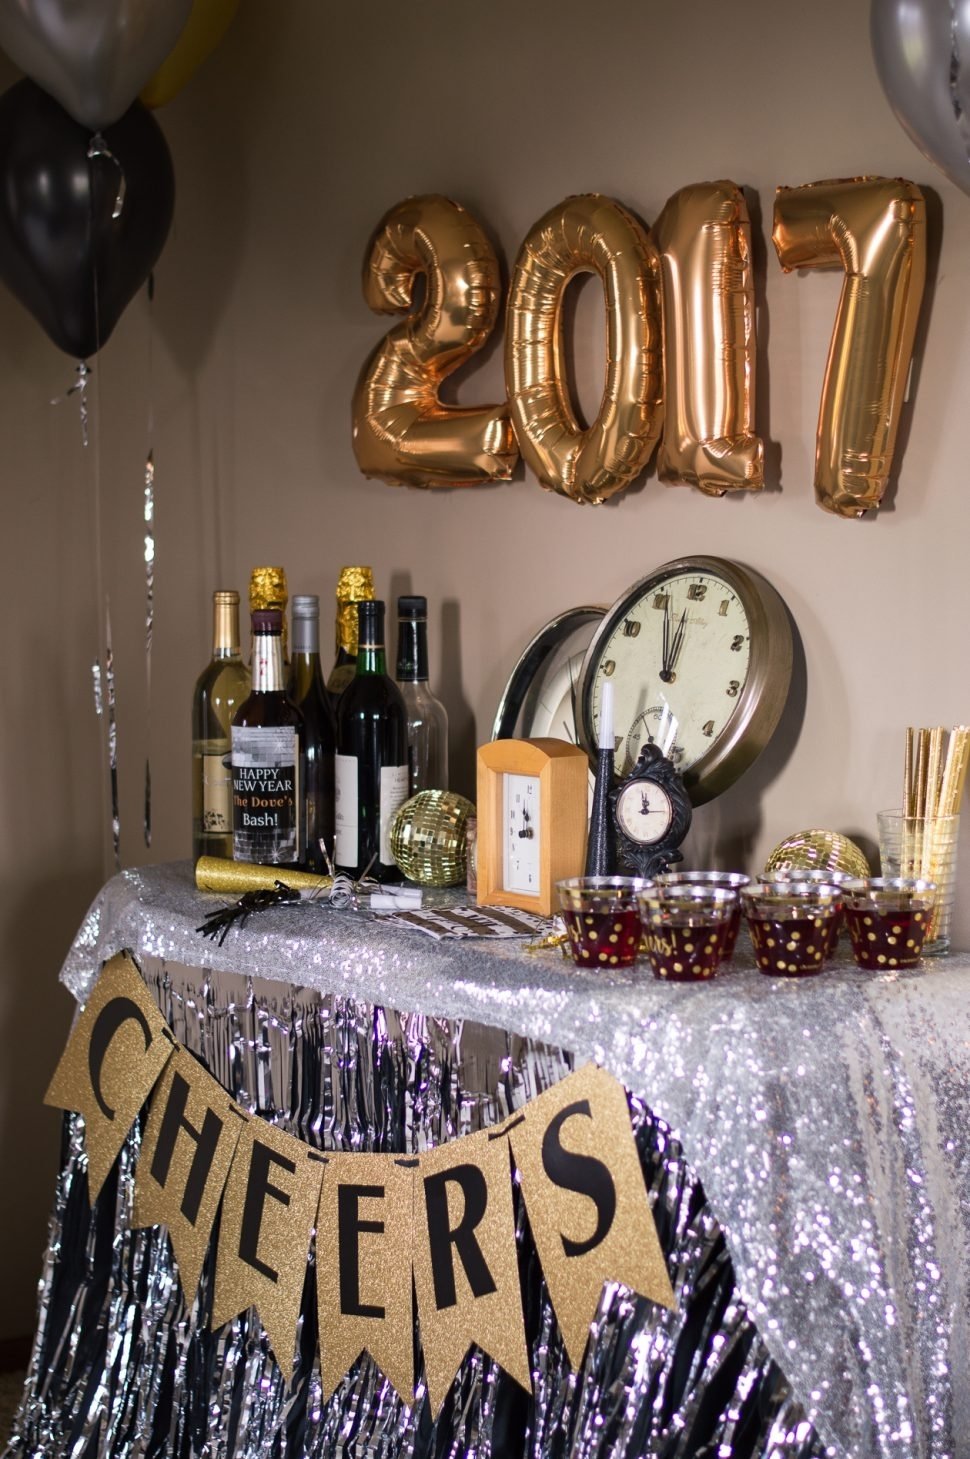 10 Famous New Years Eve Home Party Ideas home decor lunar ideas years furnishing new room house party 1 2022